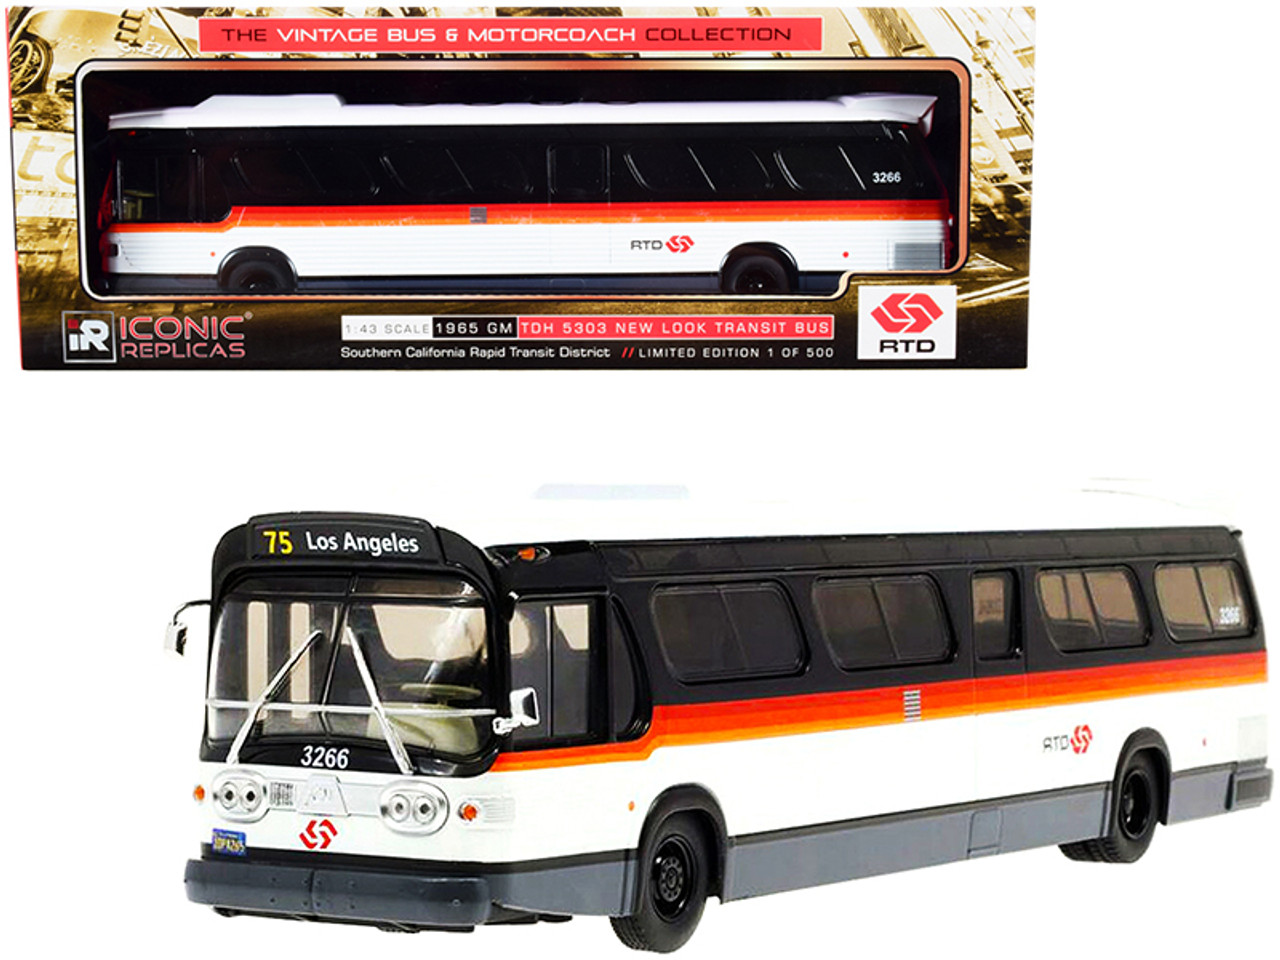 1965 GM TDH 5303 New Look Transit Bus #75 Los Angeles "RTD" White and Black with Stripes "The Vintage Bus & Motorcoach Collection" Limited Edition to 500 pieces Worldwide 1/43 Diecast Model by Iconic Replicas